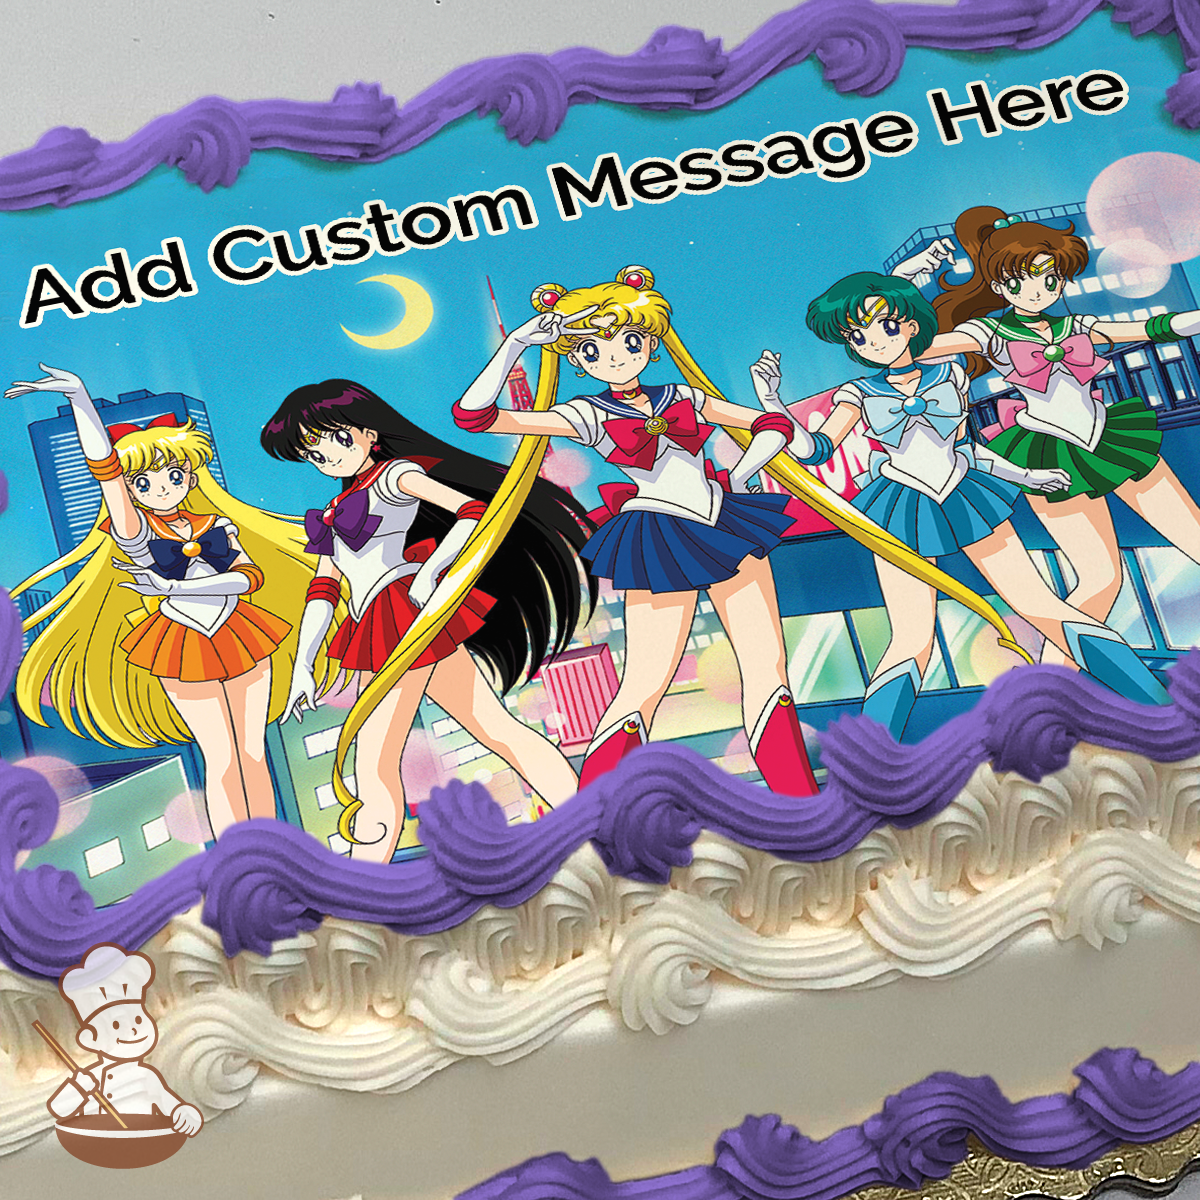 Girls of Sailor Moon printed on extra cake layer and decorated on rectangle sheet cake.